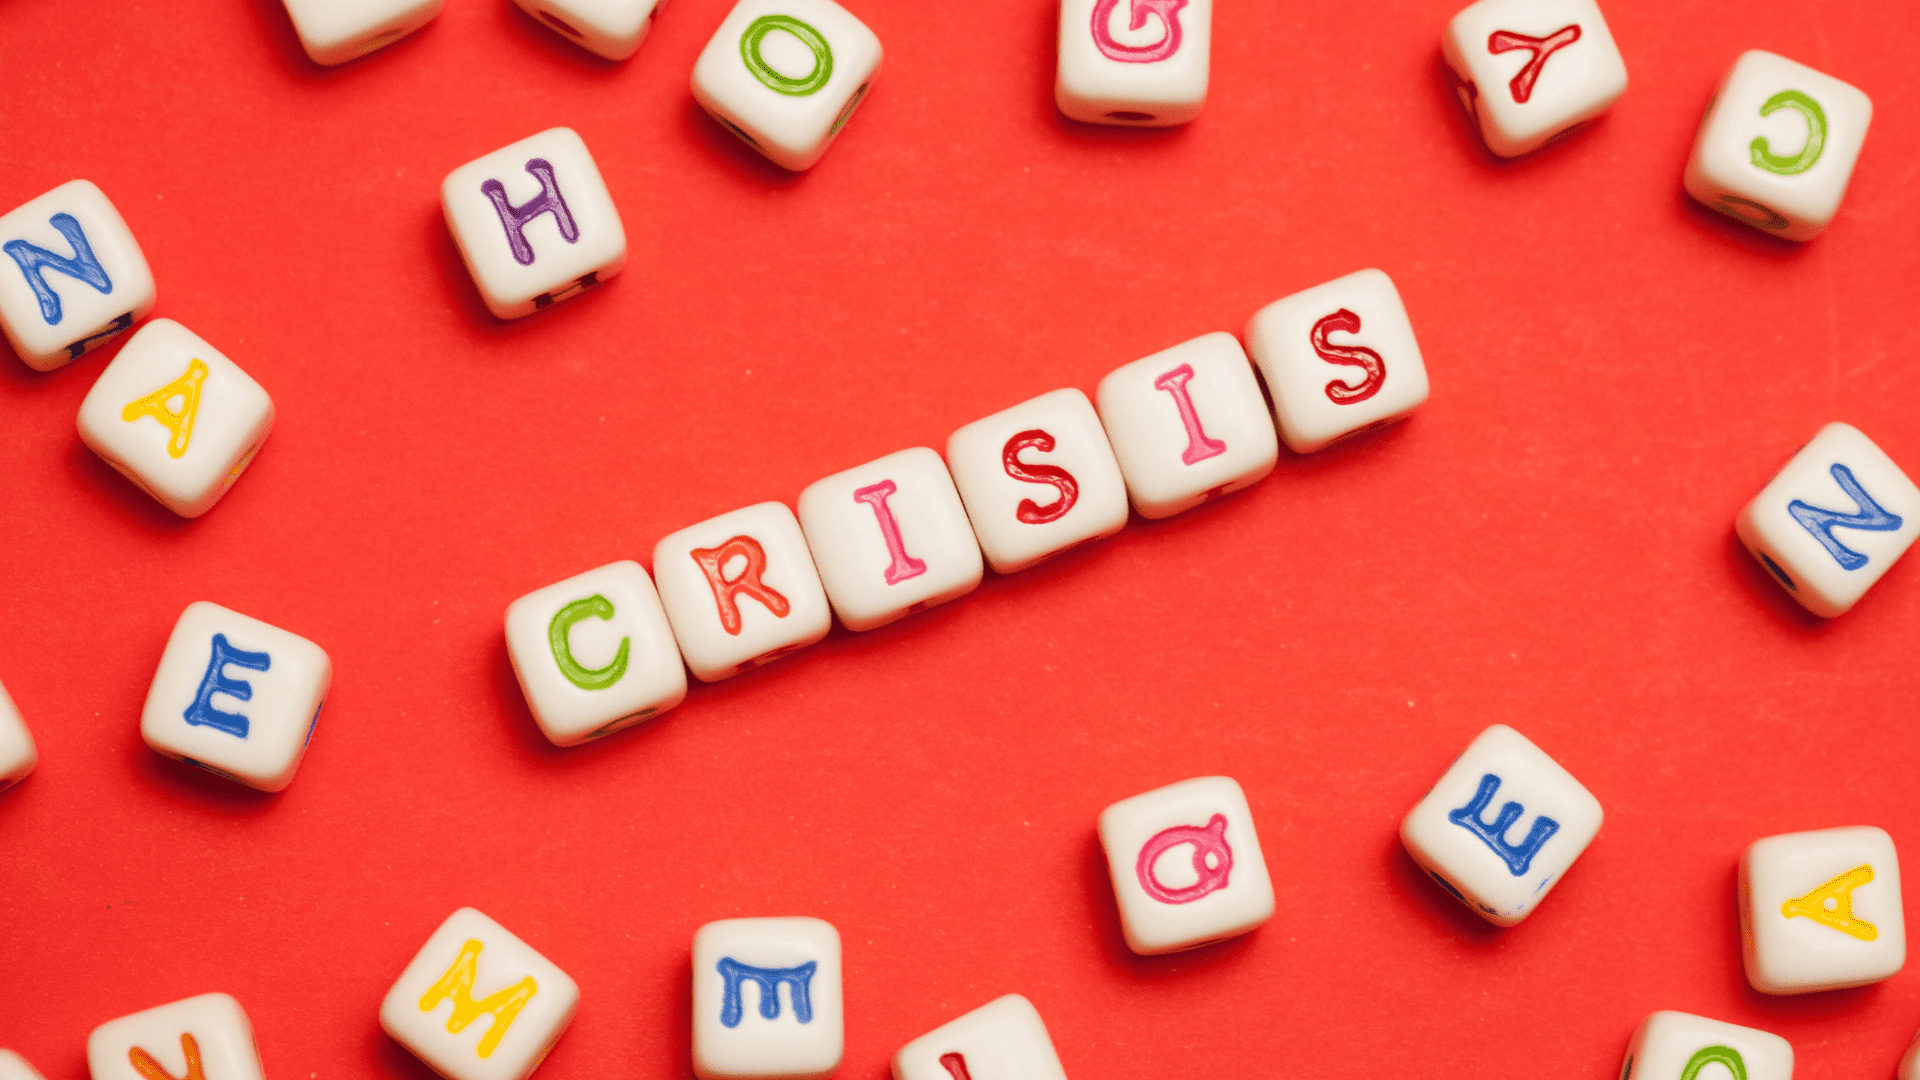 What can my PR agency do in a crisis?